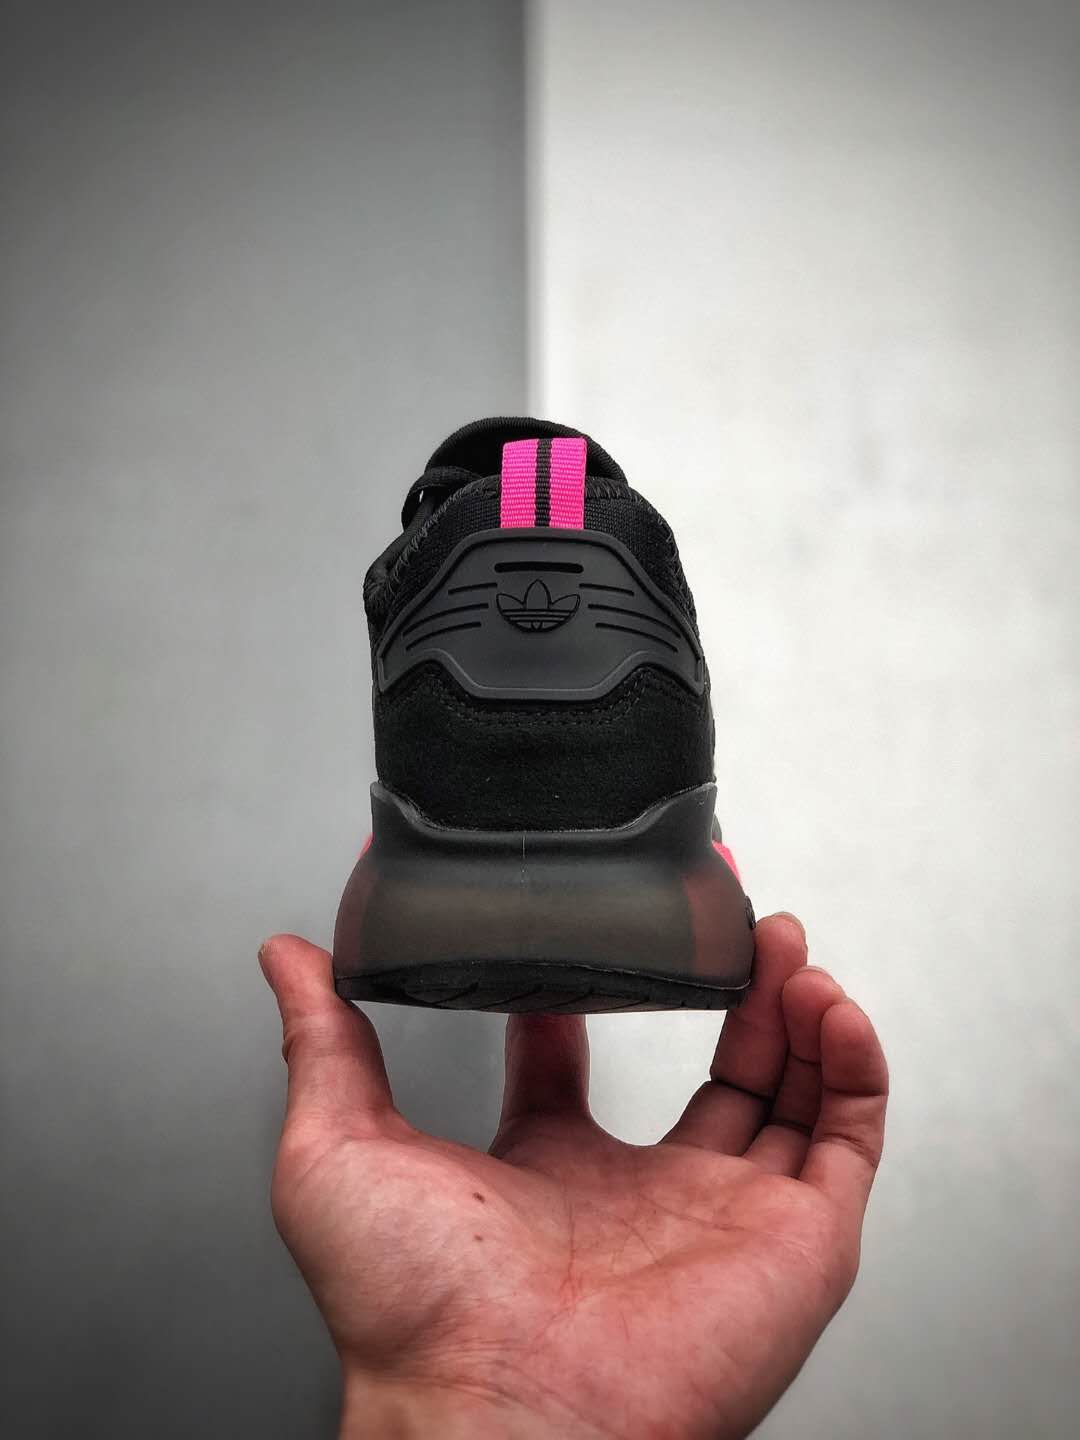 Adidas ZX 2K Boost 'Black Shock Pink' FV8986 - Lightweight and Stylish Footwear for Ultimate Comfort